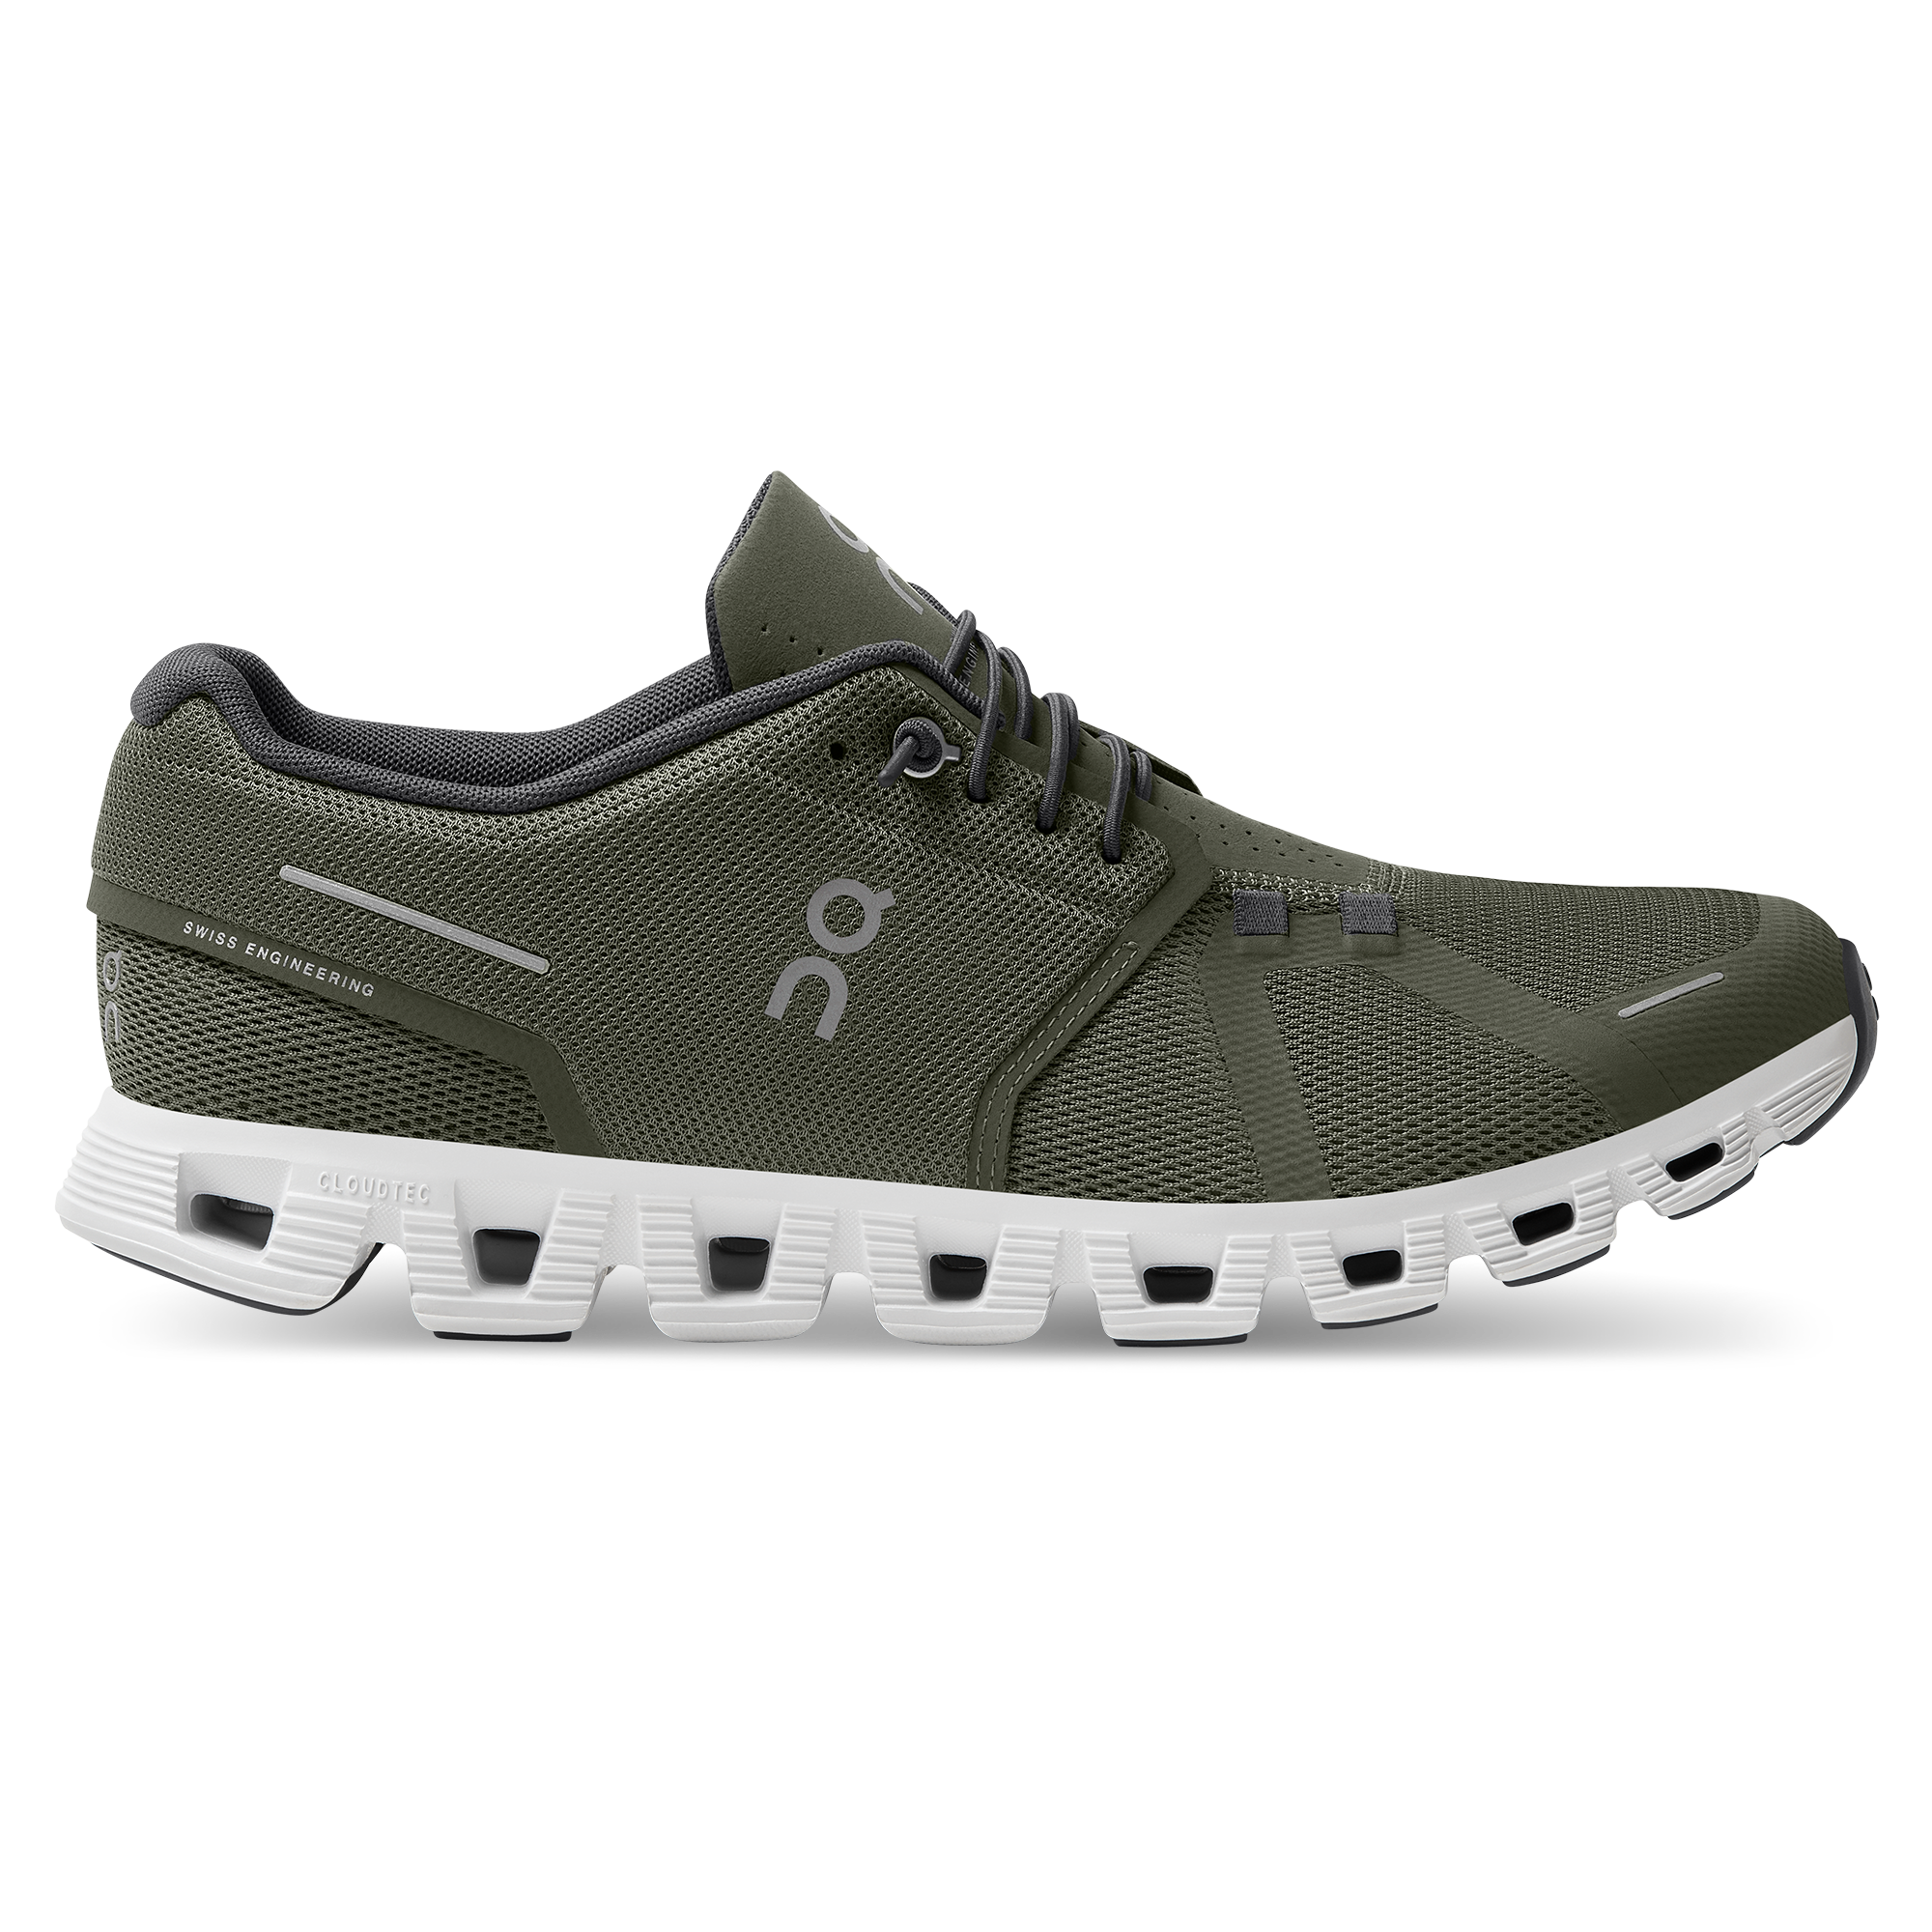 Cloud 5 - Olive | White